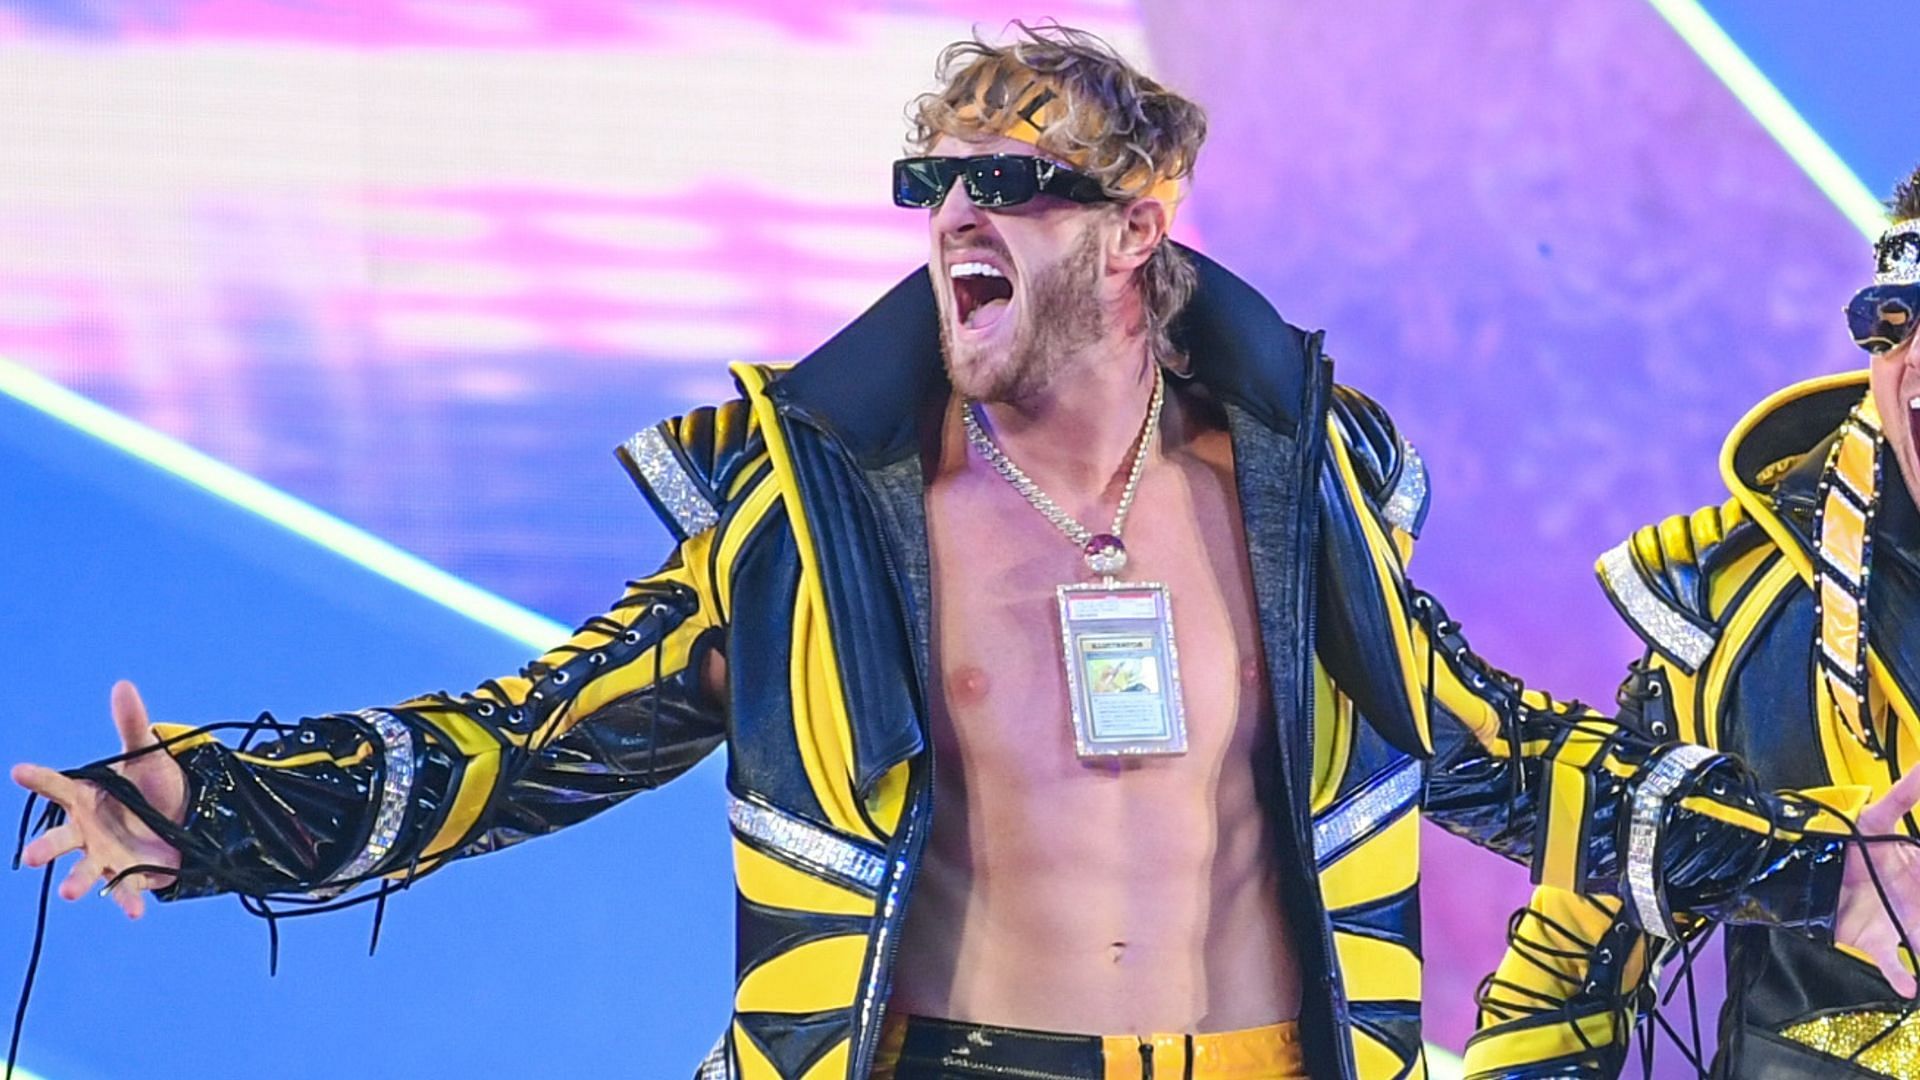 Logan Paul will be part of the Money in the Bank match